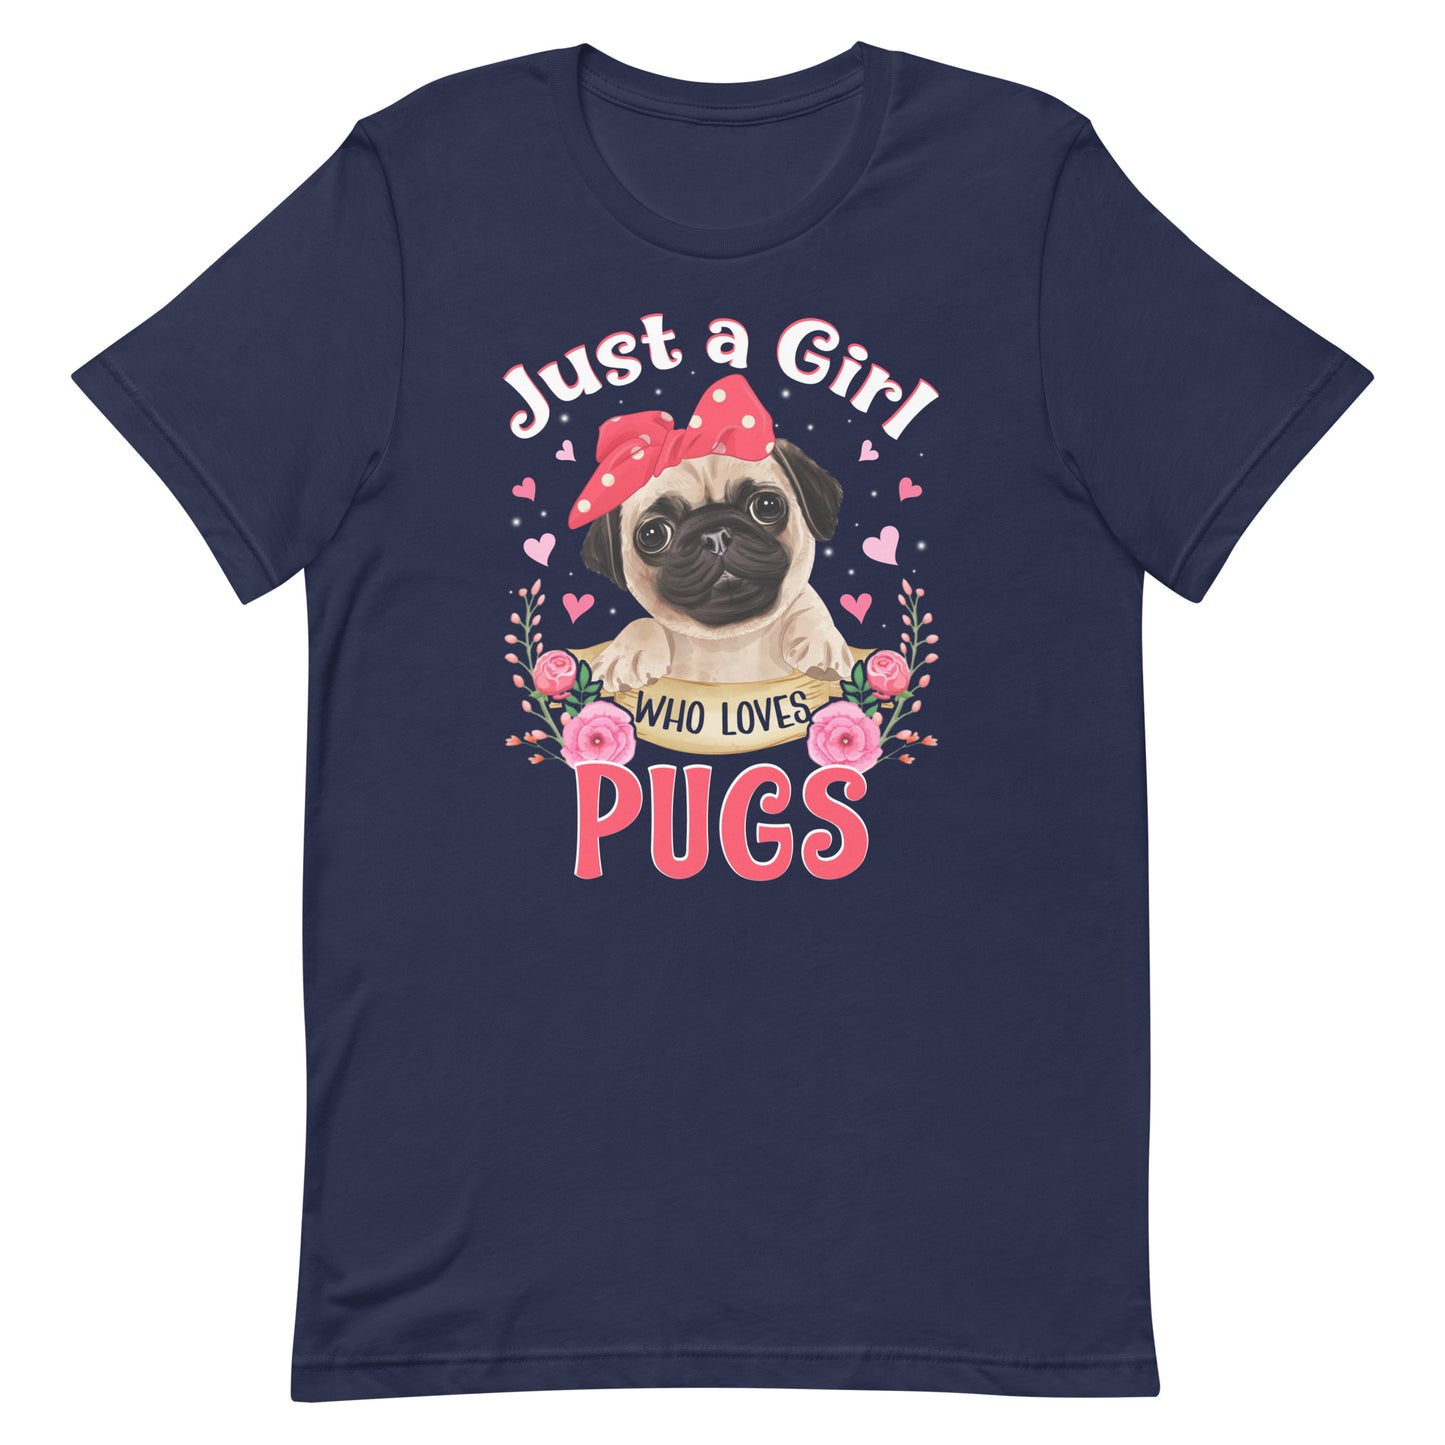 Just a Girl Who Loves Pugs T-Shirt